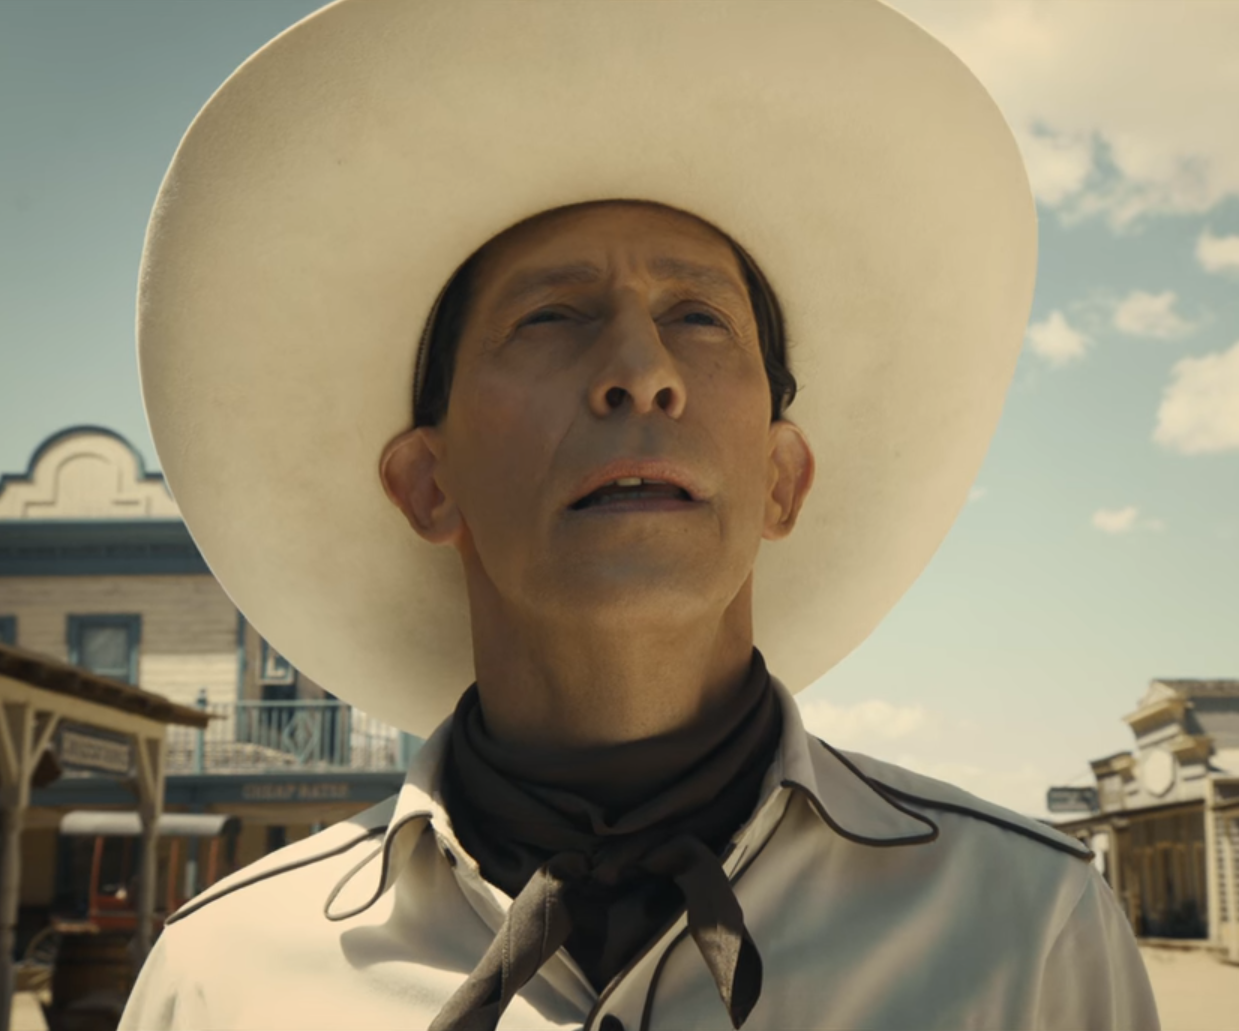 The Ballad of Buster Scruggs – A Film Review – Ryno's Ramblings